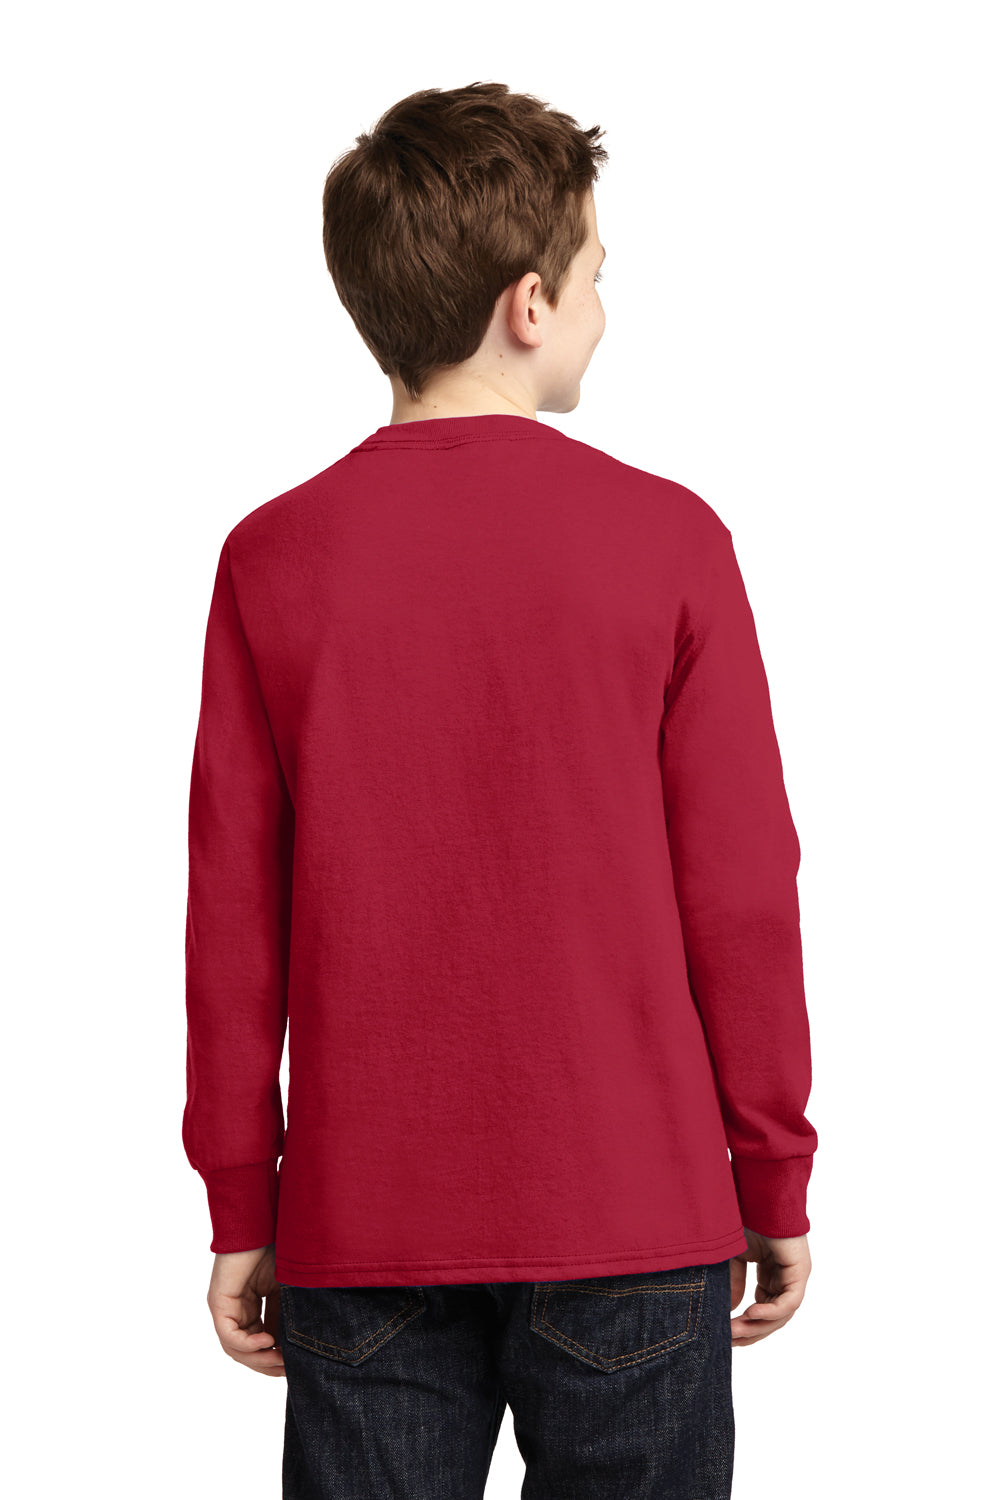 Port & Company PC54YLS Youth Core Long Sleeve Crewneck T-Shirt Red Back